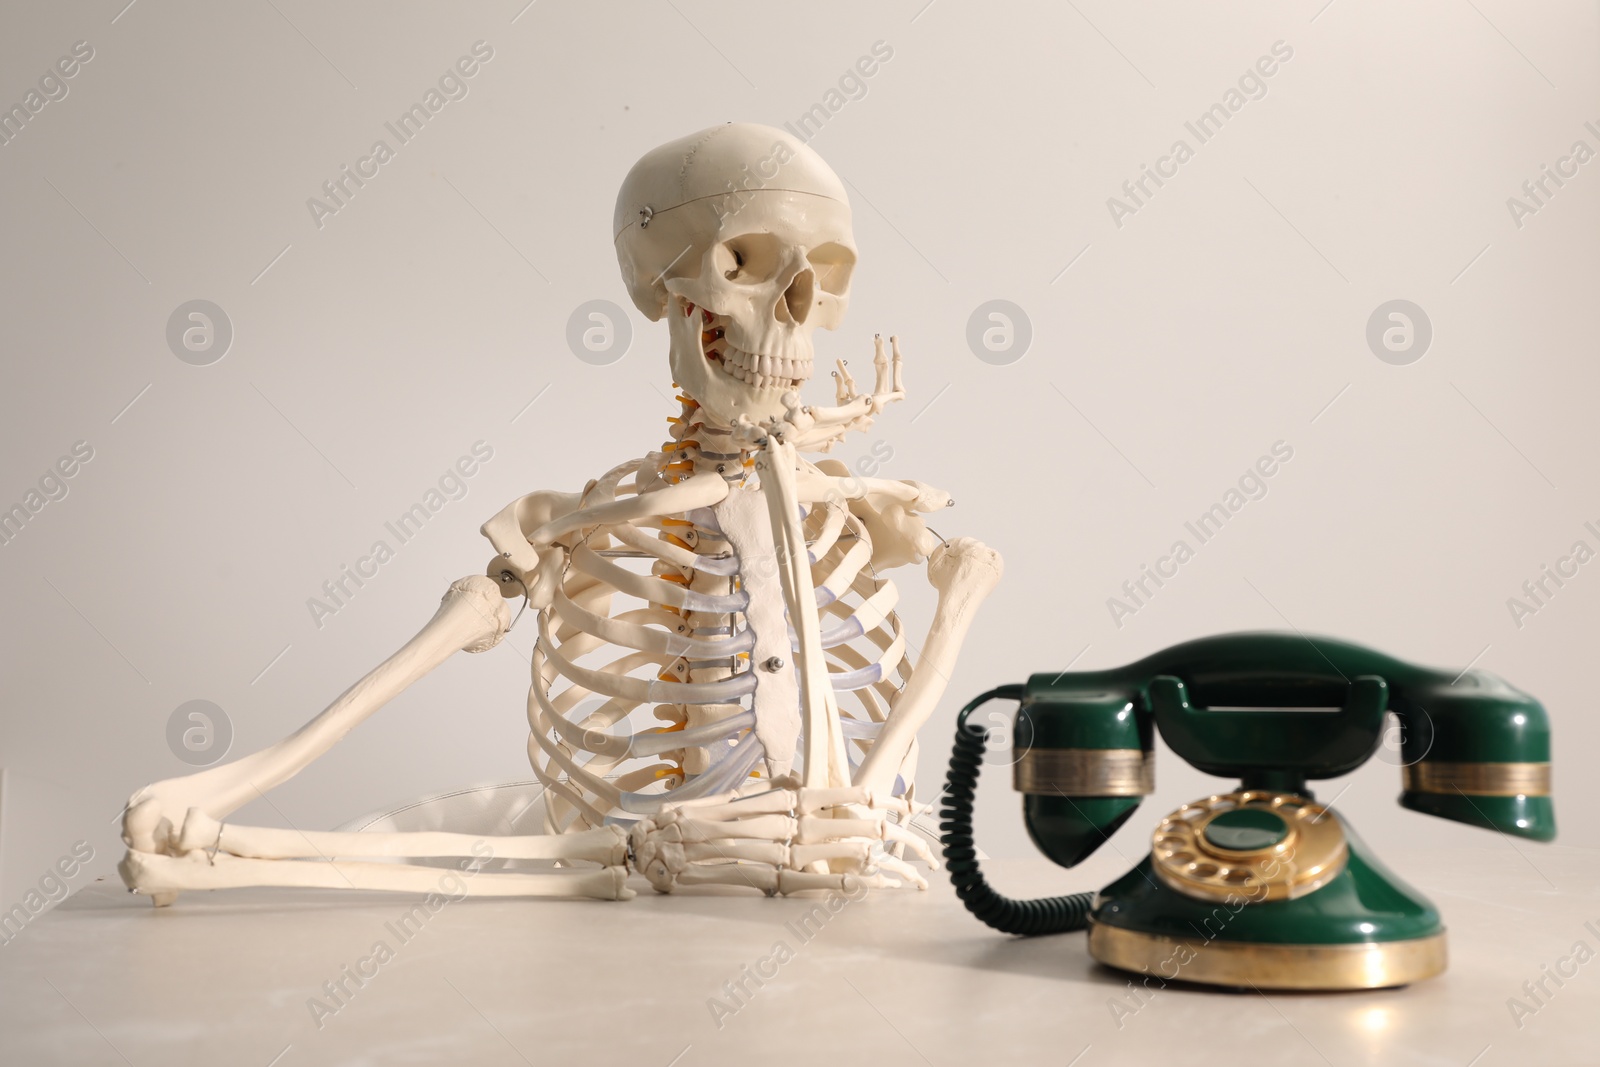 Photo of Waiting concept. Human skeleton at table with corded telephone against light grey background